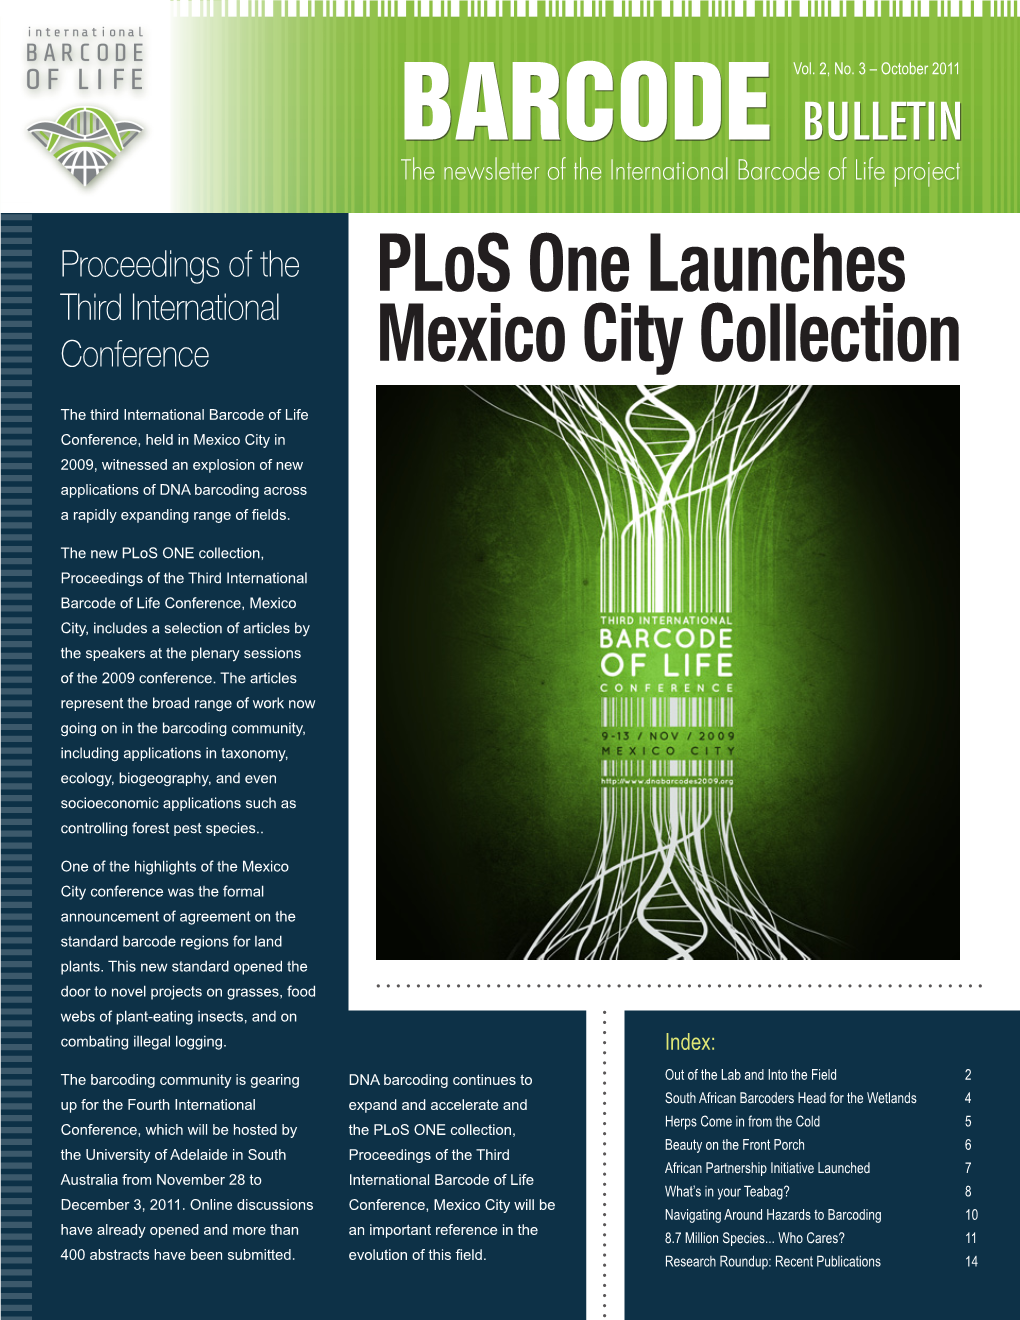 Plos One Launches Mexico City Collection